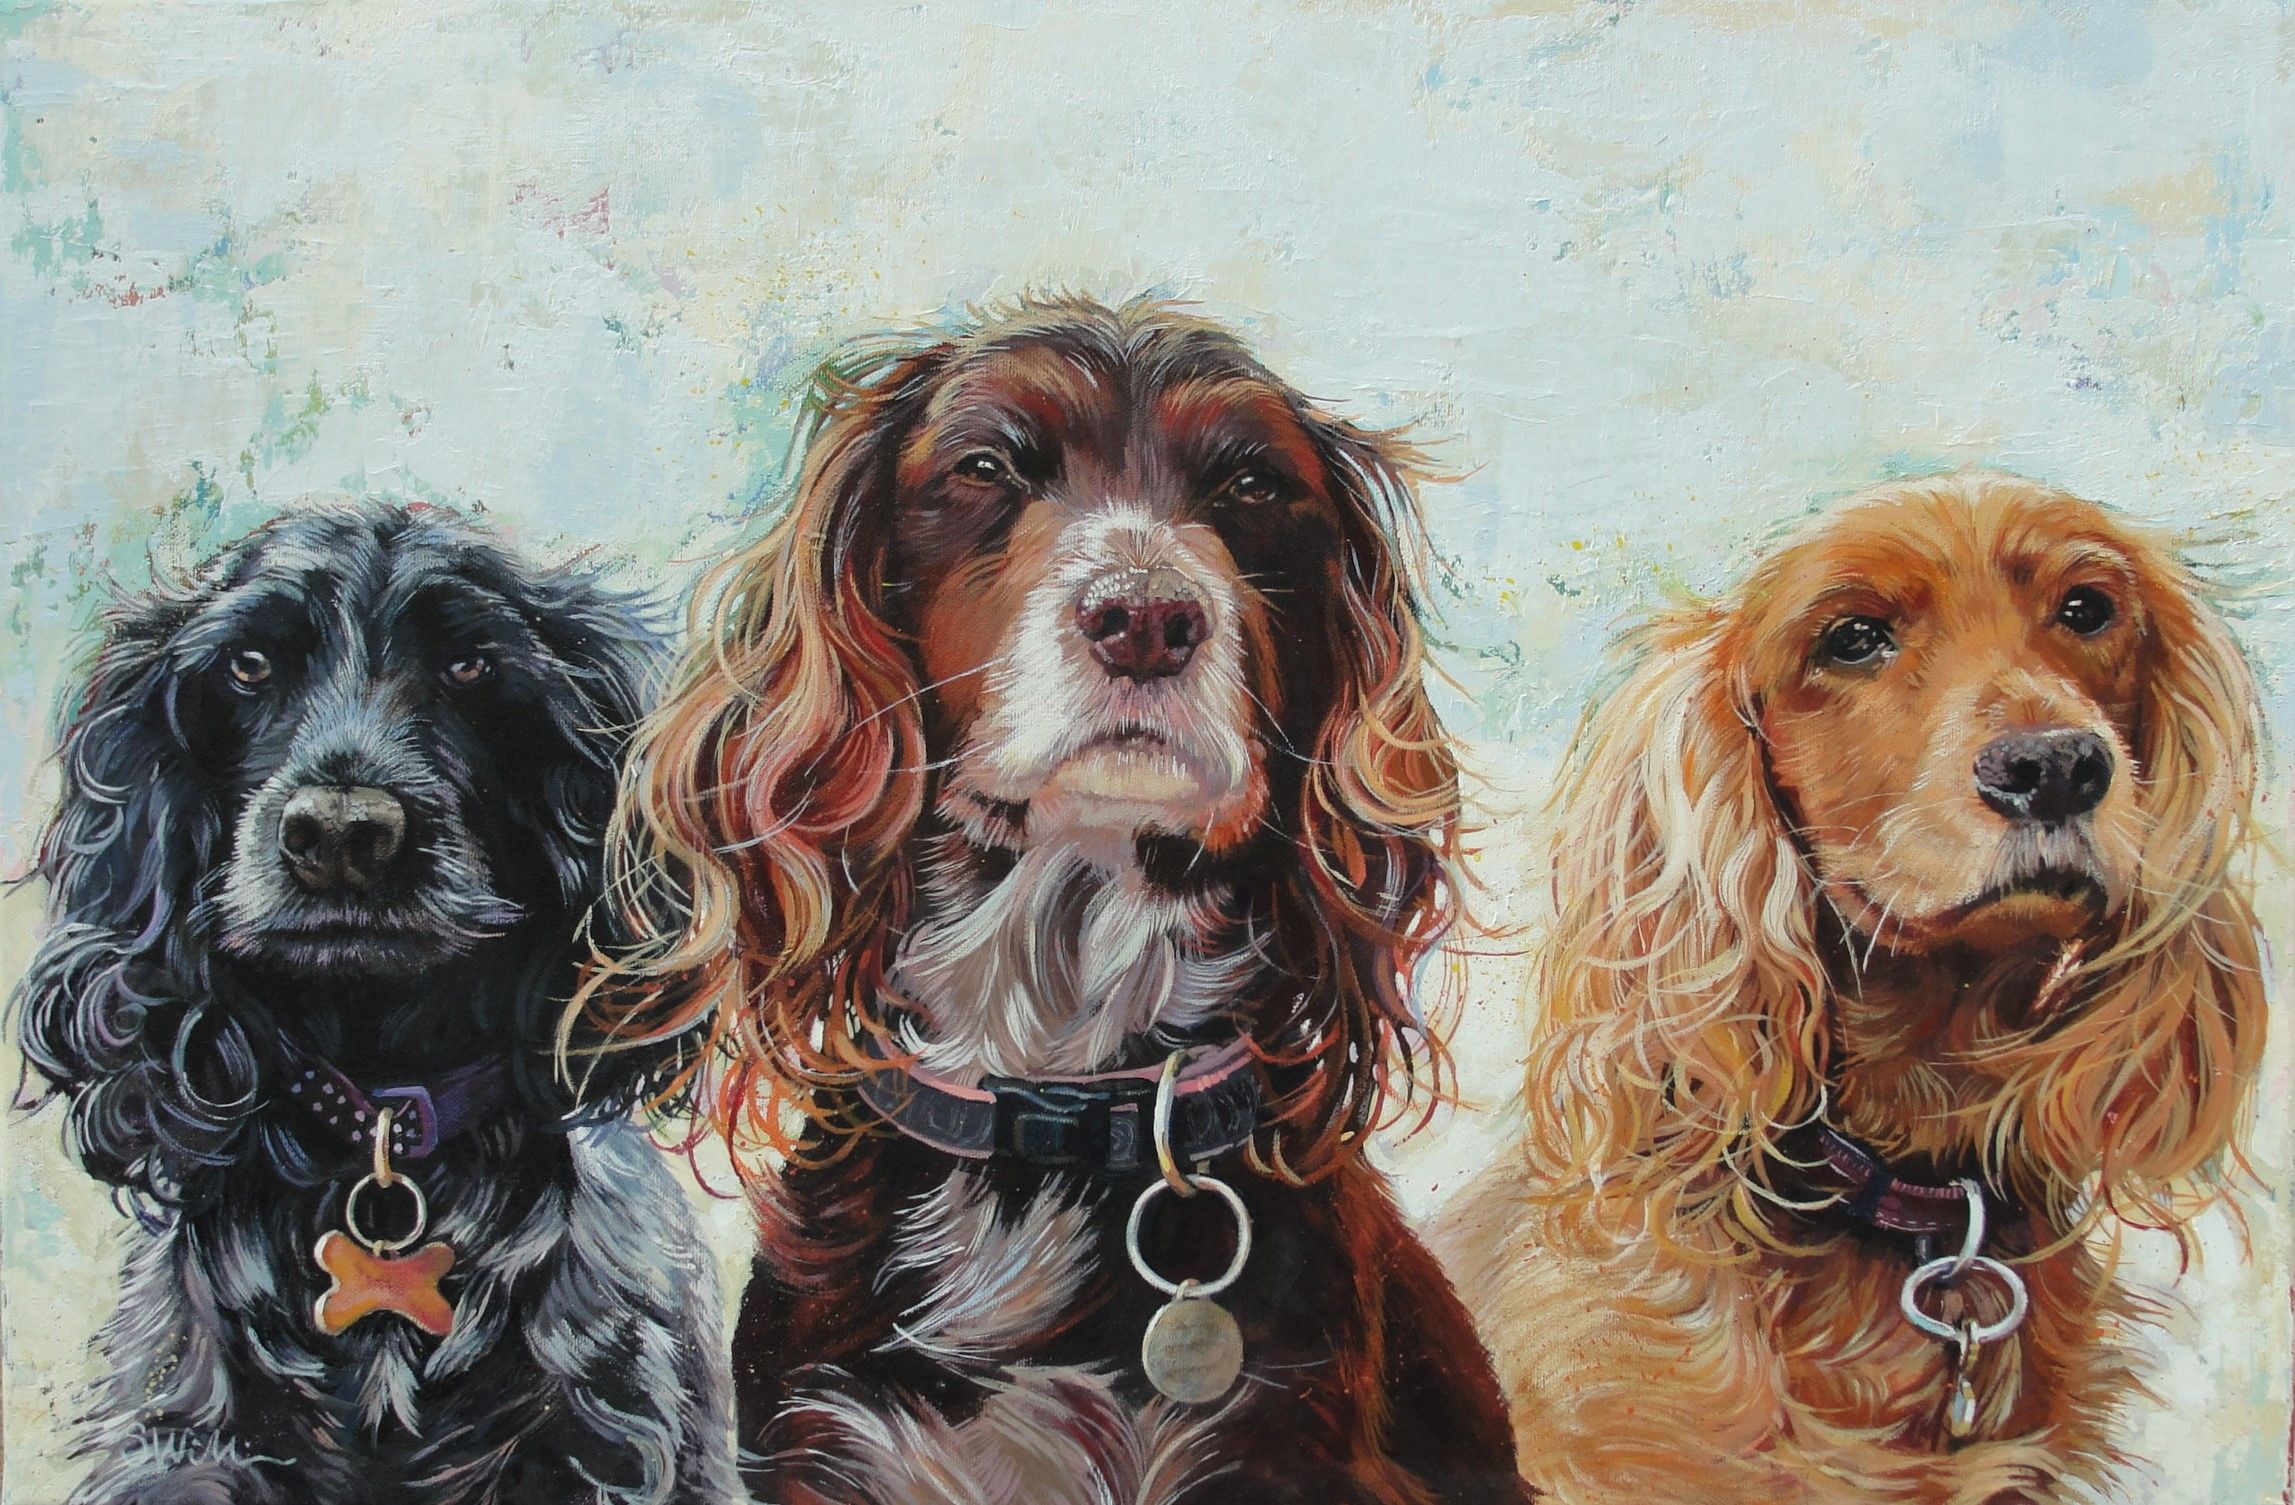 Commission an Animal Portrait by Sharon Williams